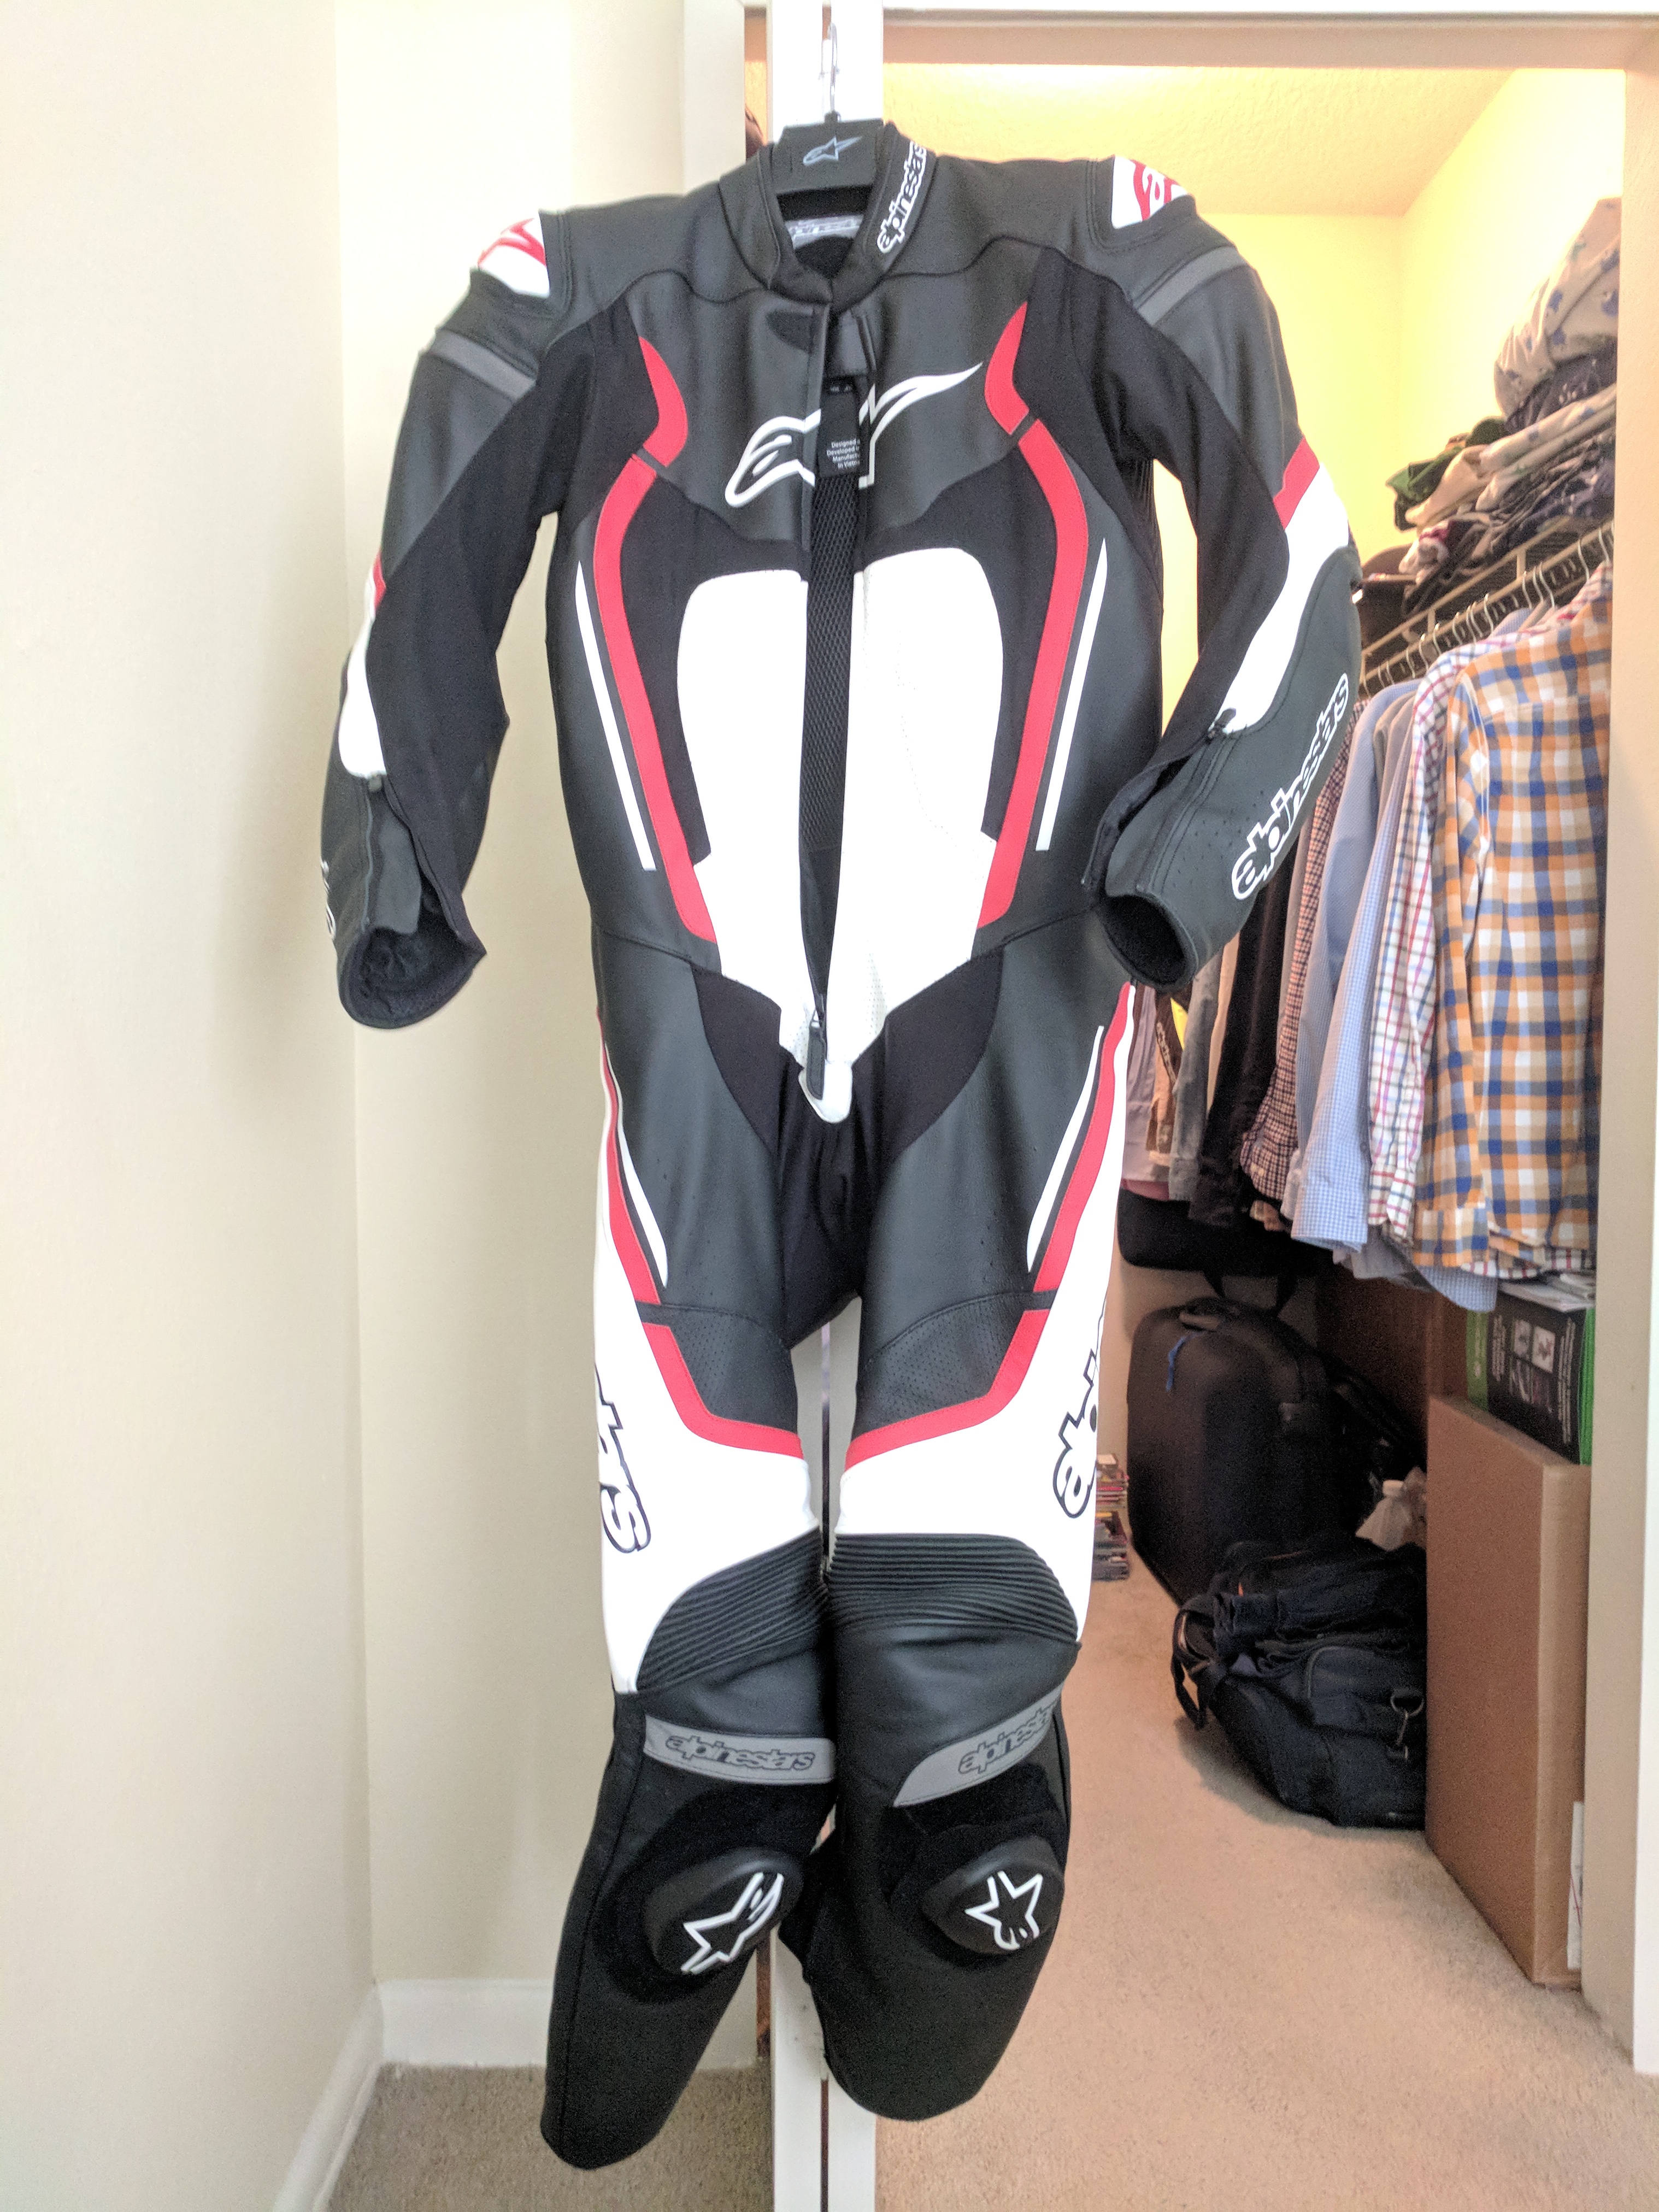 Viewing Images For Alpinestars Motegi v2 leather suit :: MotorcycleGear.com